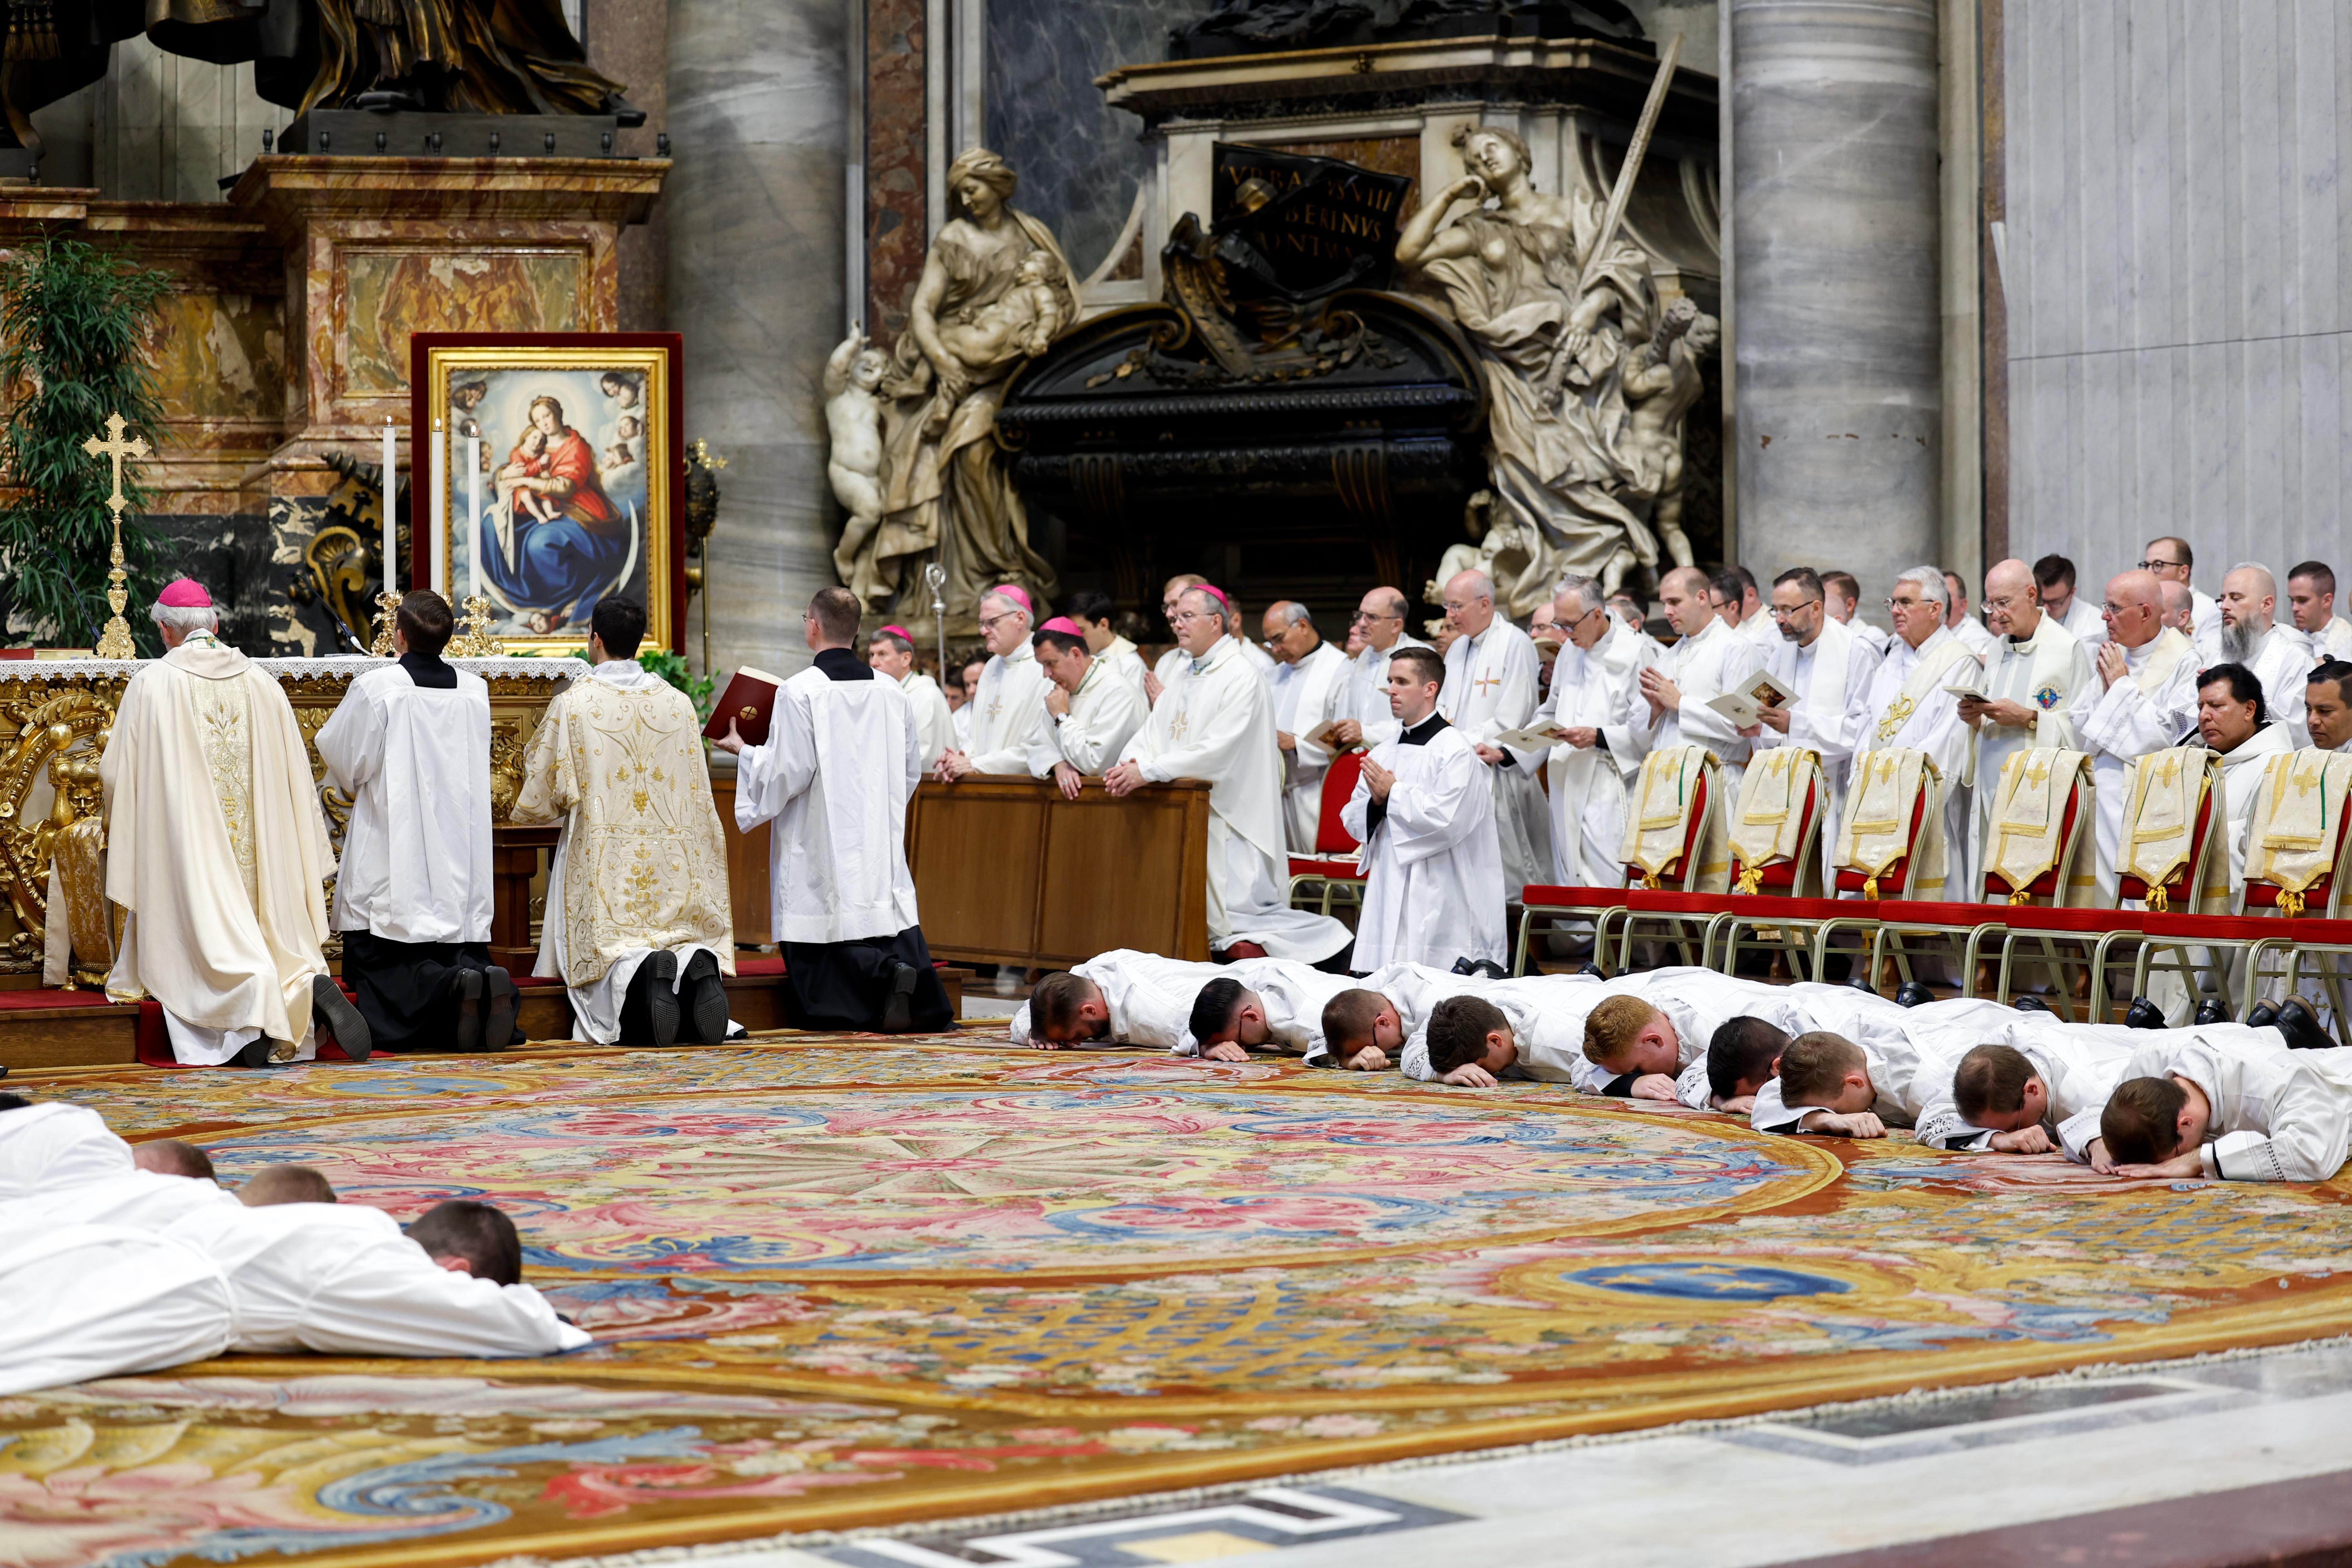 New deacons from the Pontifical North American College in Rome lie prostrate during their ordination in St. Peter's Basilica.